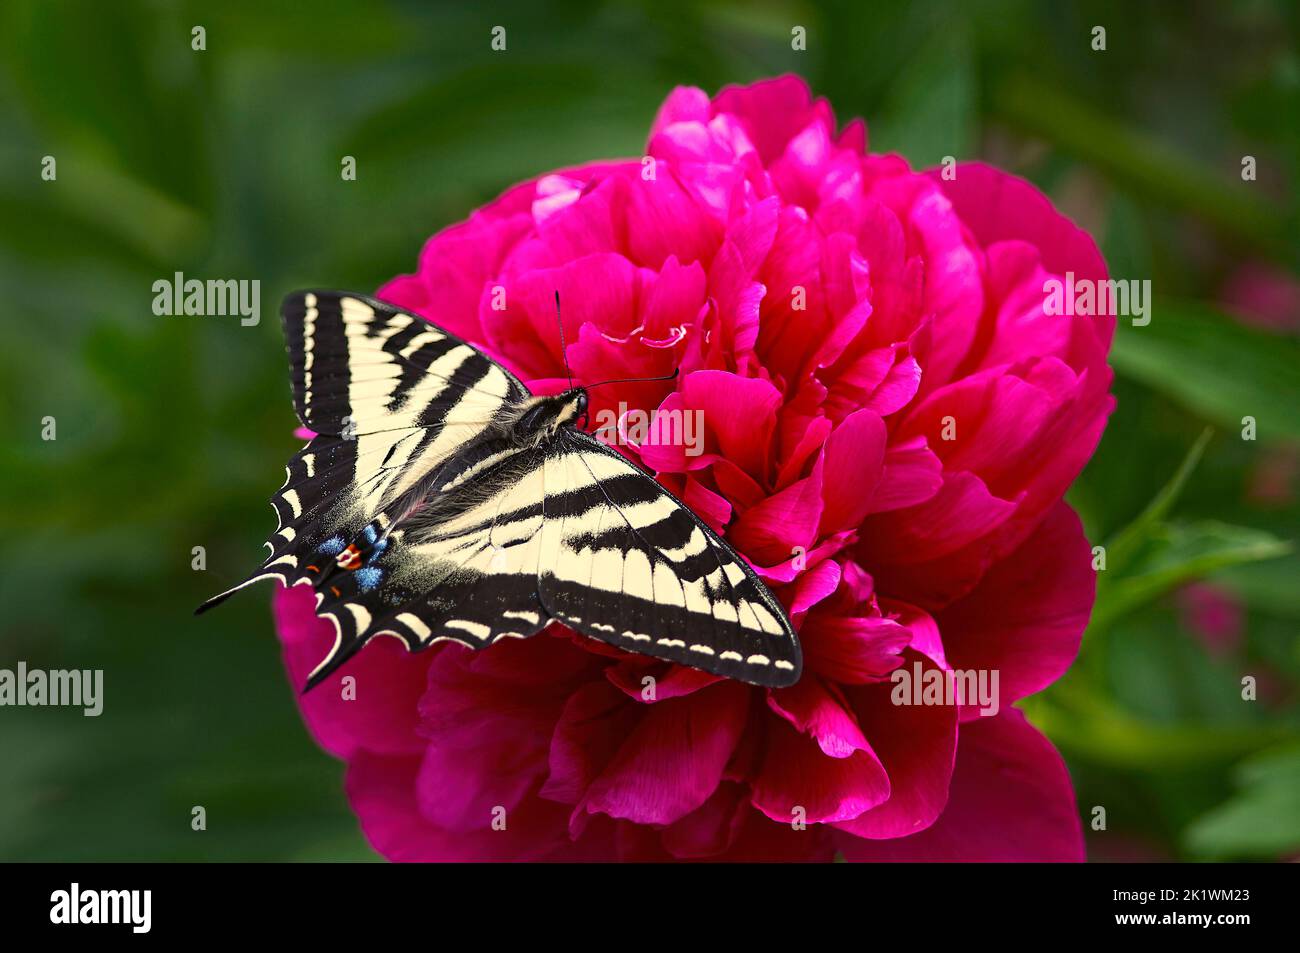 Western Tiger Swallowtail butterfly (Papilio rutulus) on a pink Peony flower (Paeonia). Stock Photo